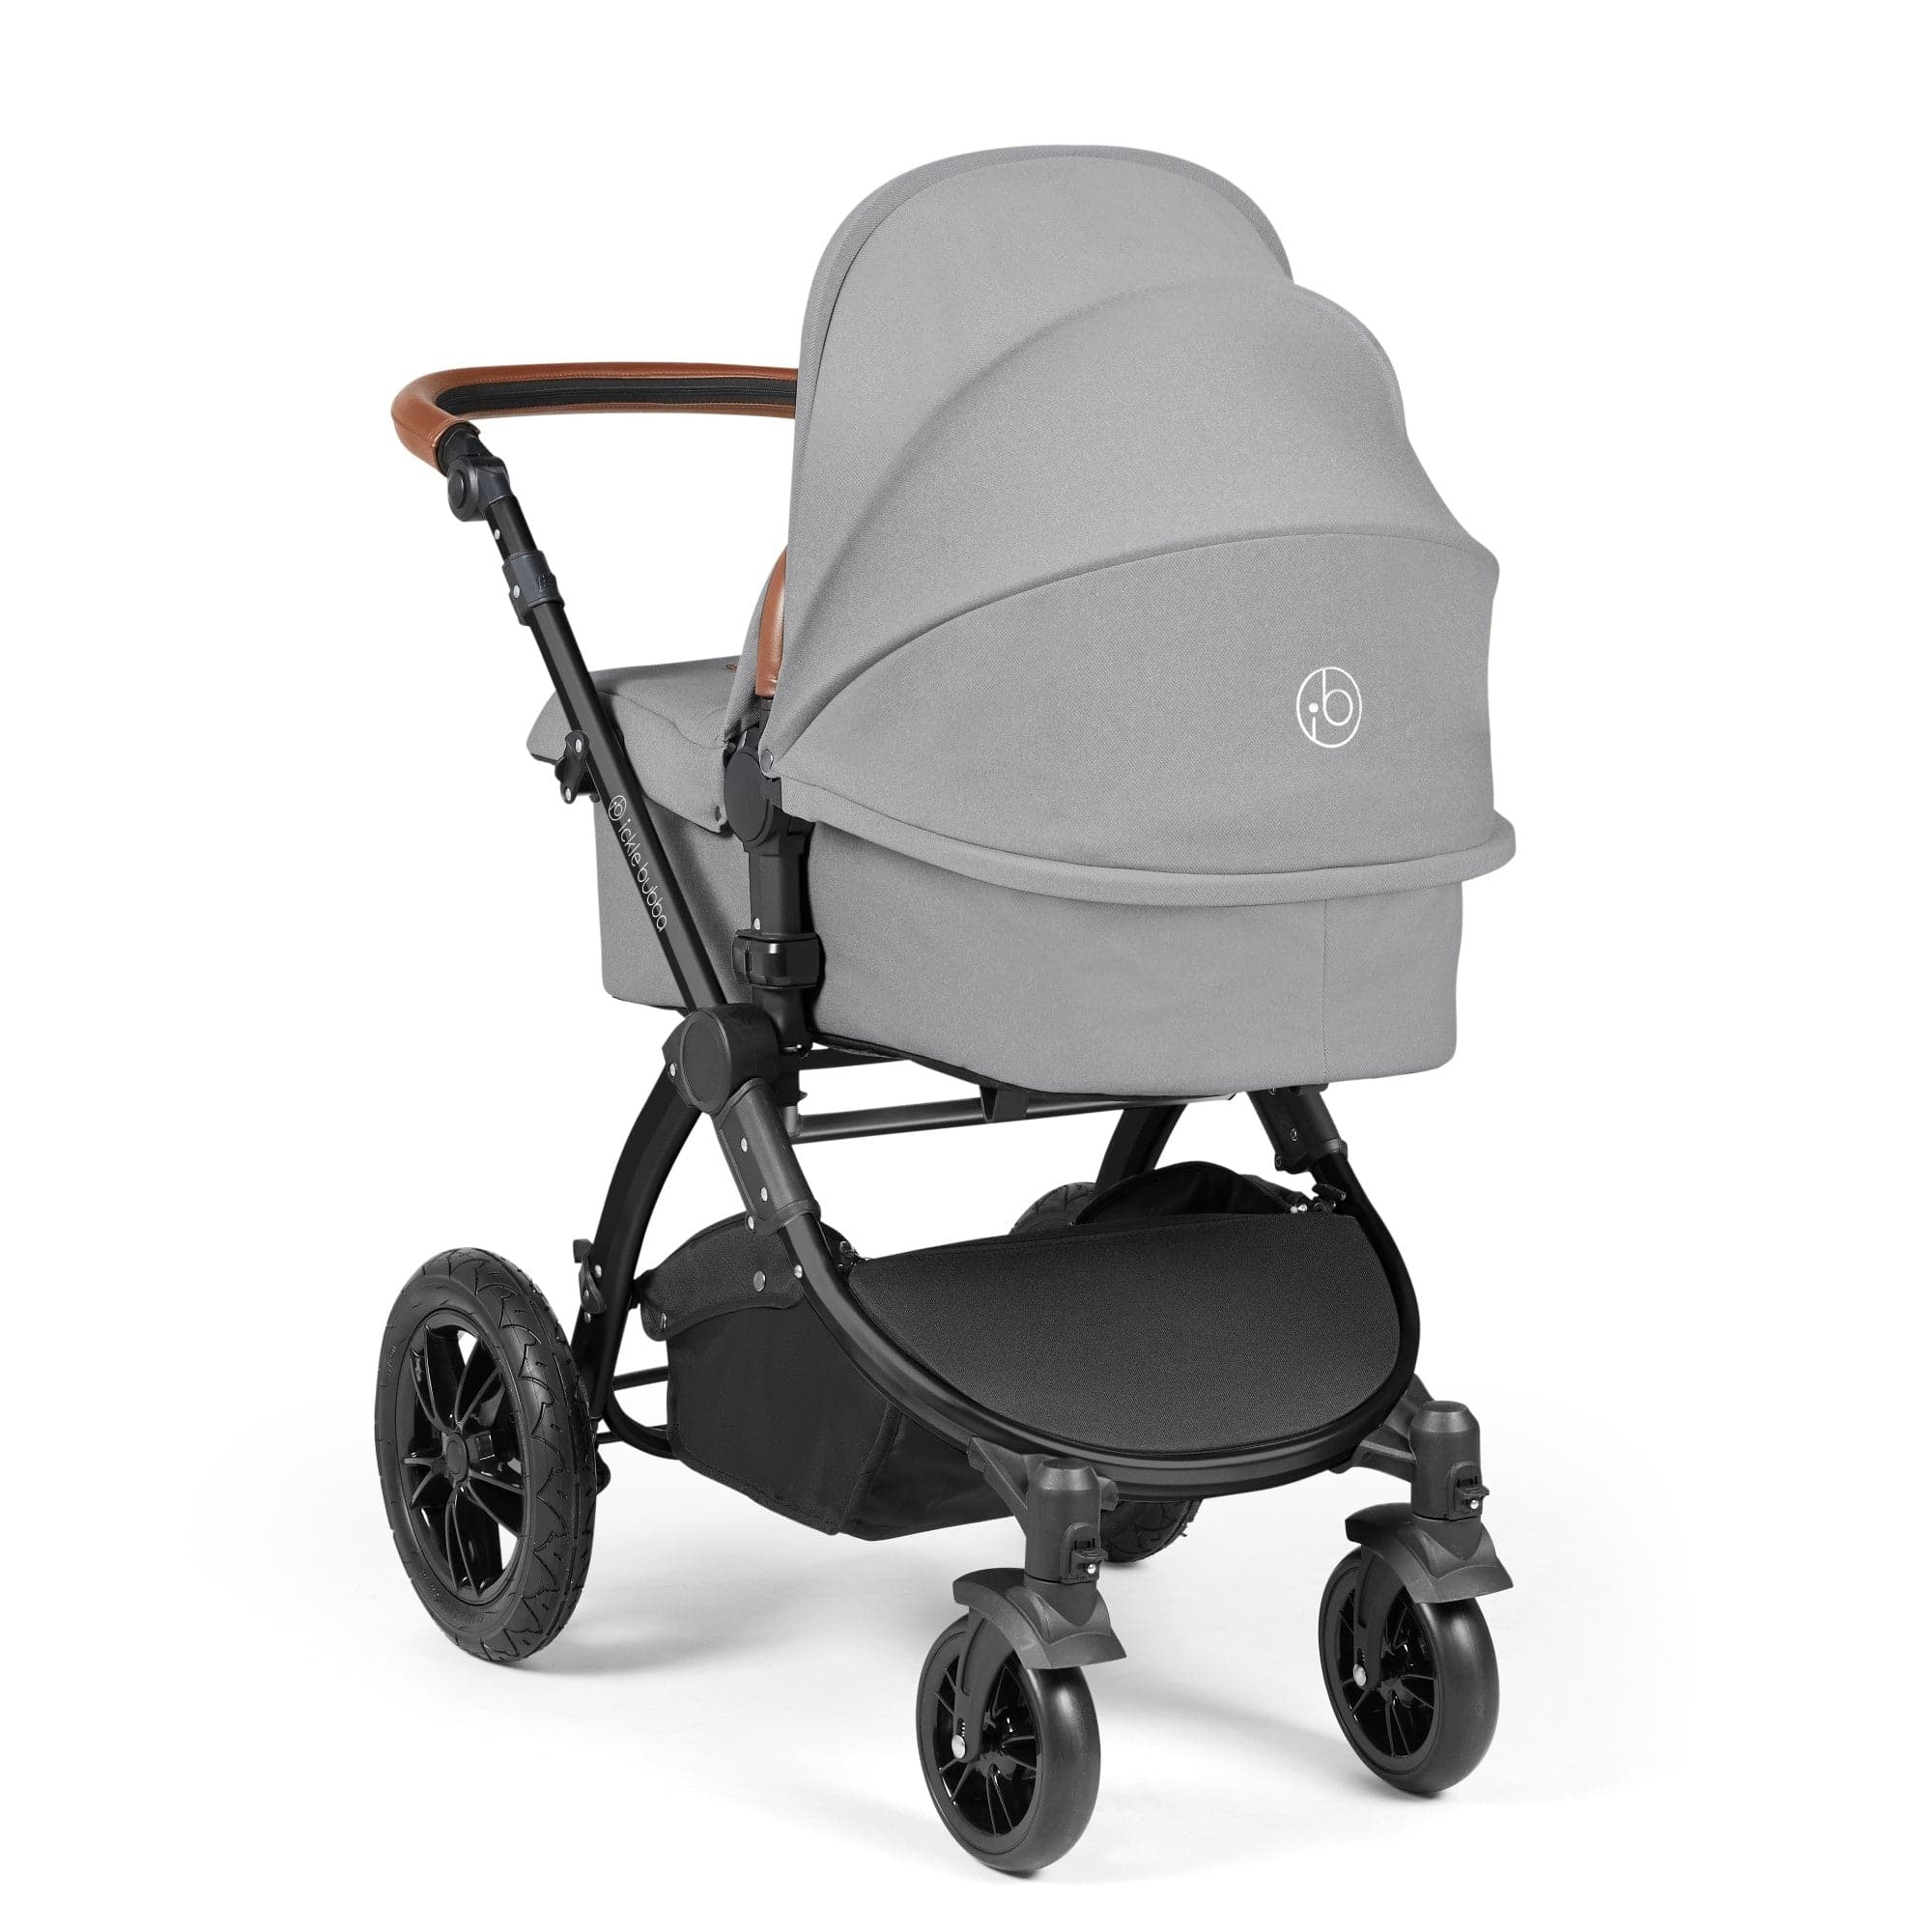 Ickle Bubba Stomp Luxe All-in-One I-Size Travel System With Isofix Base - Black / Pearl Grey / Tan - For Your Little One